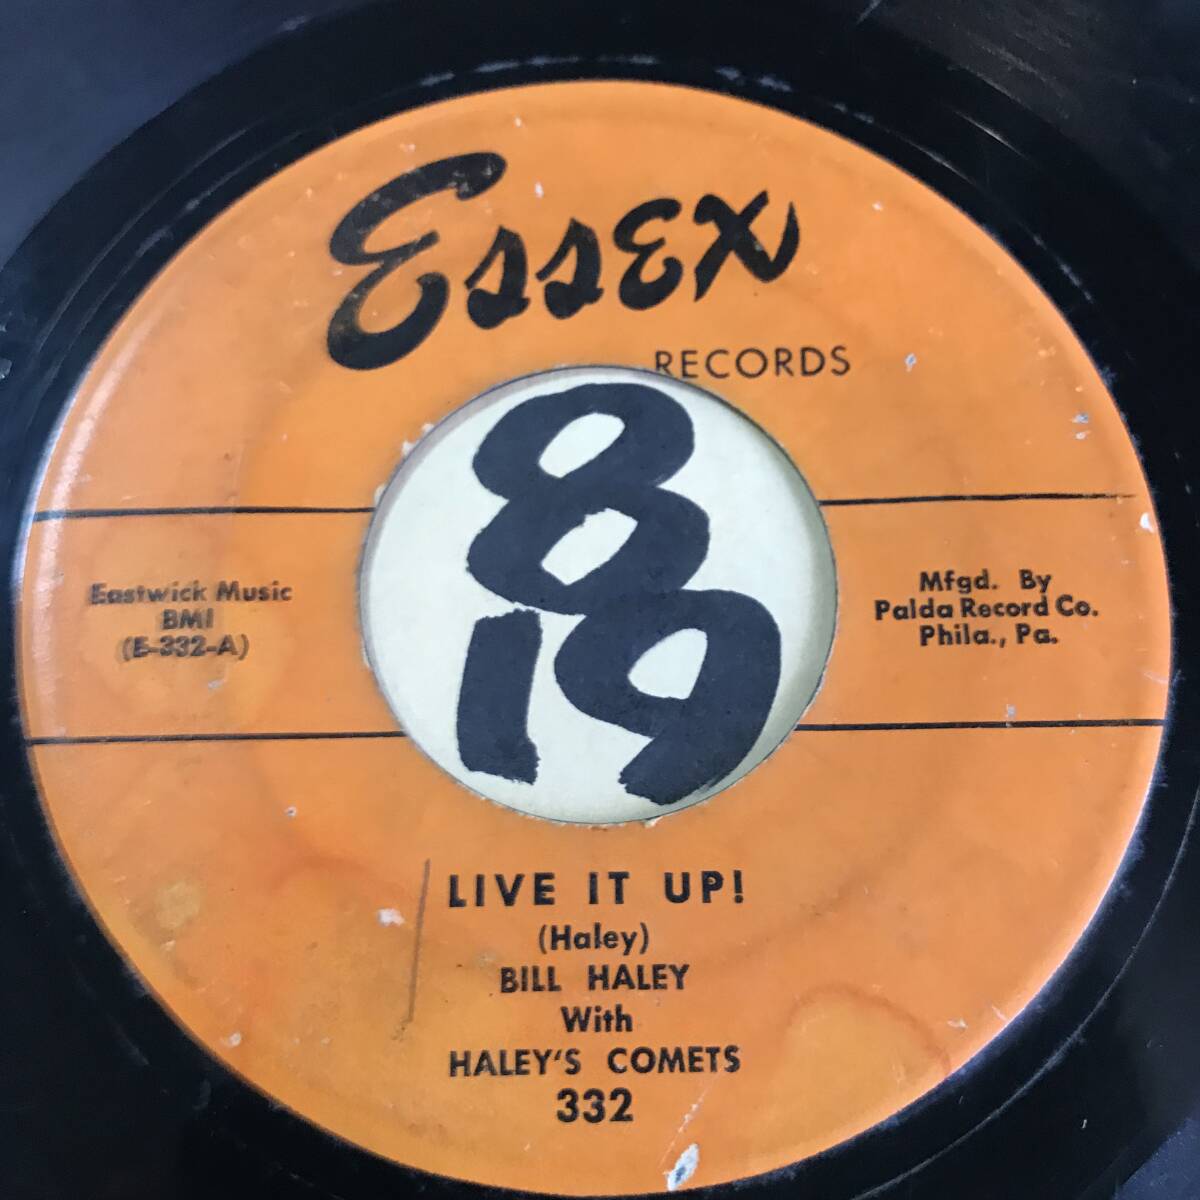  audition BILL HALEY WITH HALEY*S COMETS LIVE IT UP! both sides G scratch great number 